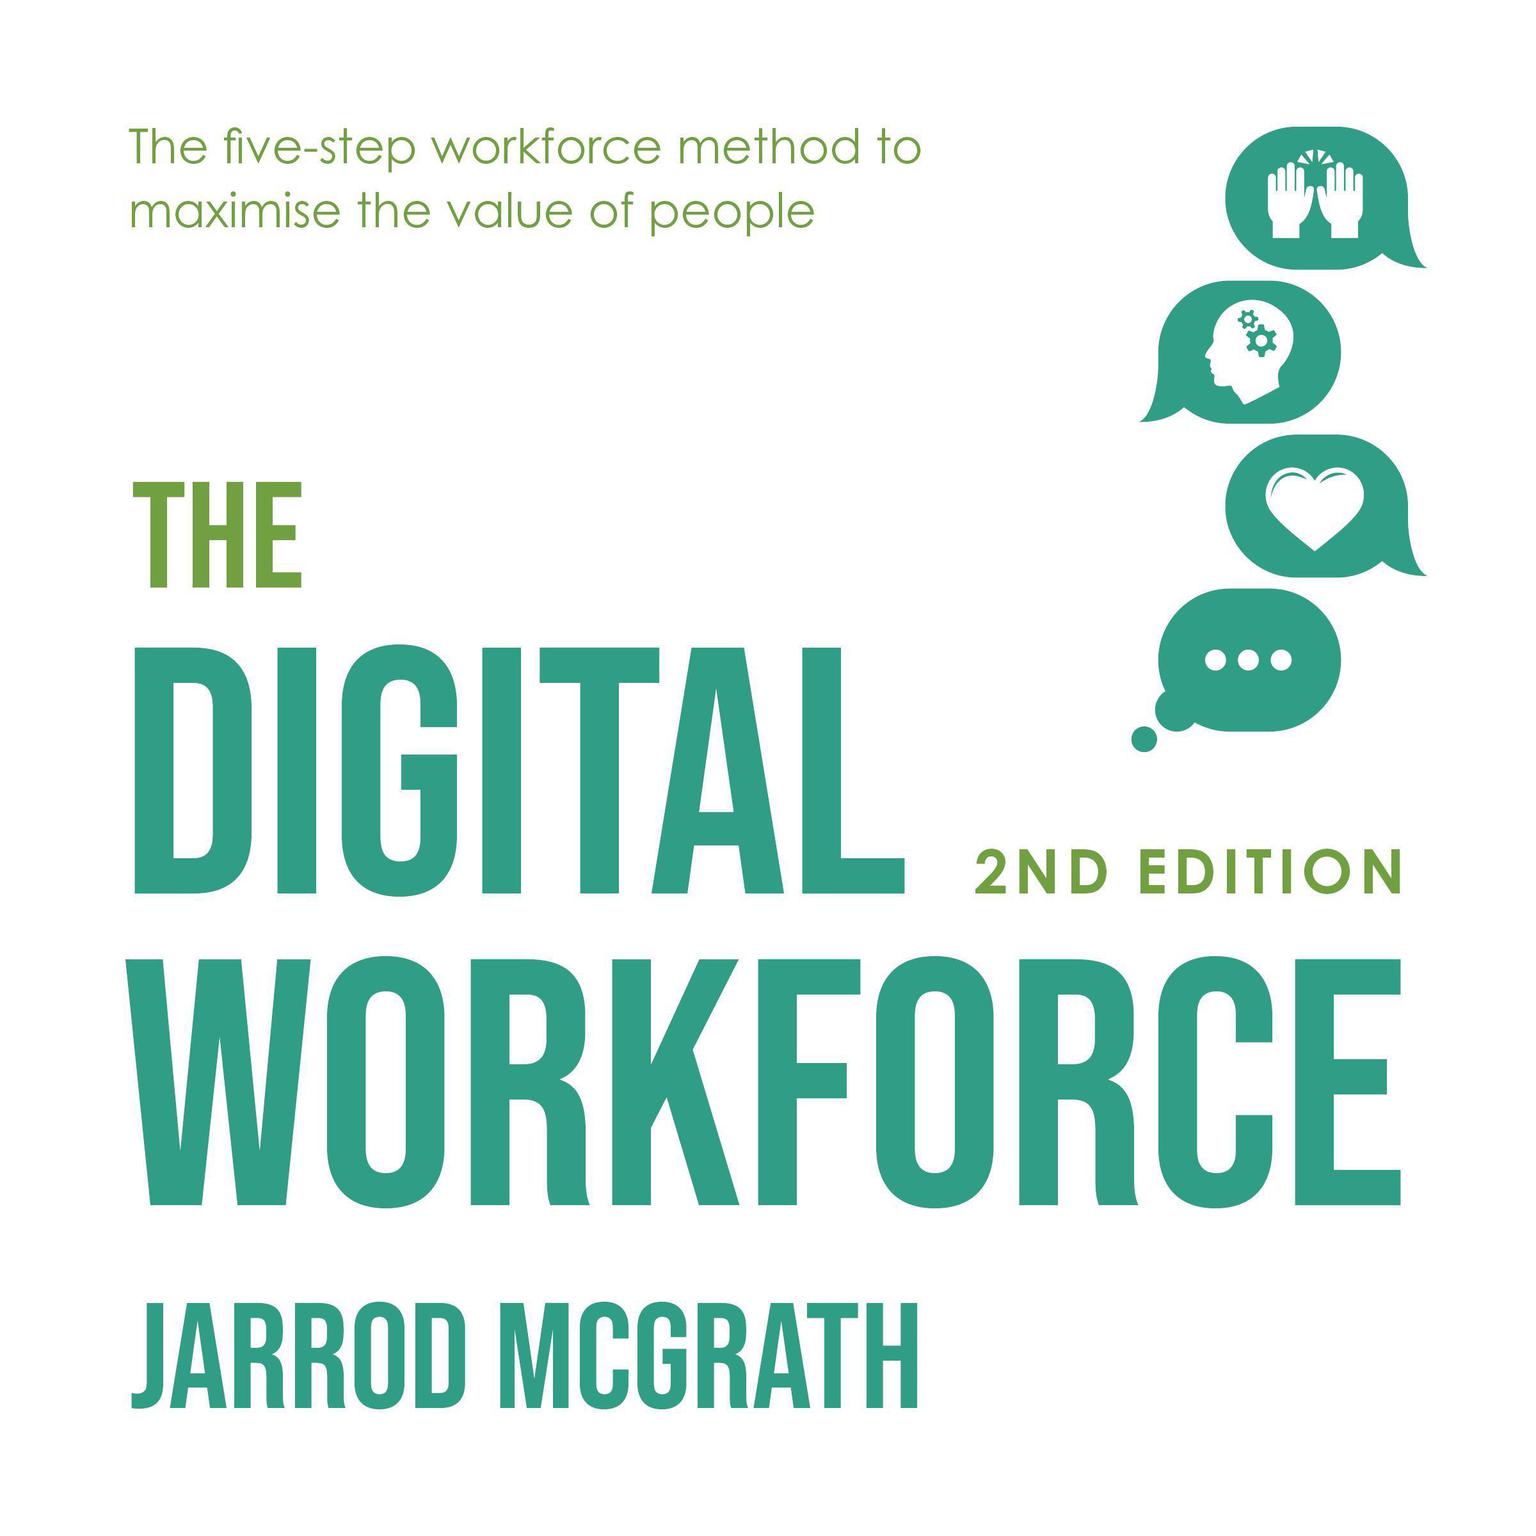 The Digital Workforce - 2nd edition: The five-step workforce method to maximise the value of people Audiobook, by Jarrod McGrath